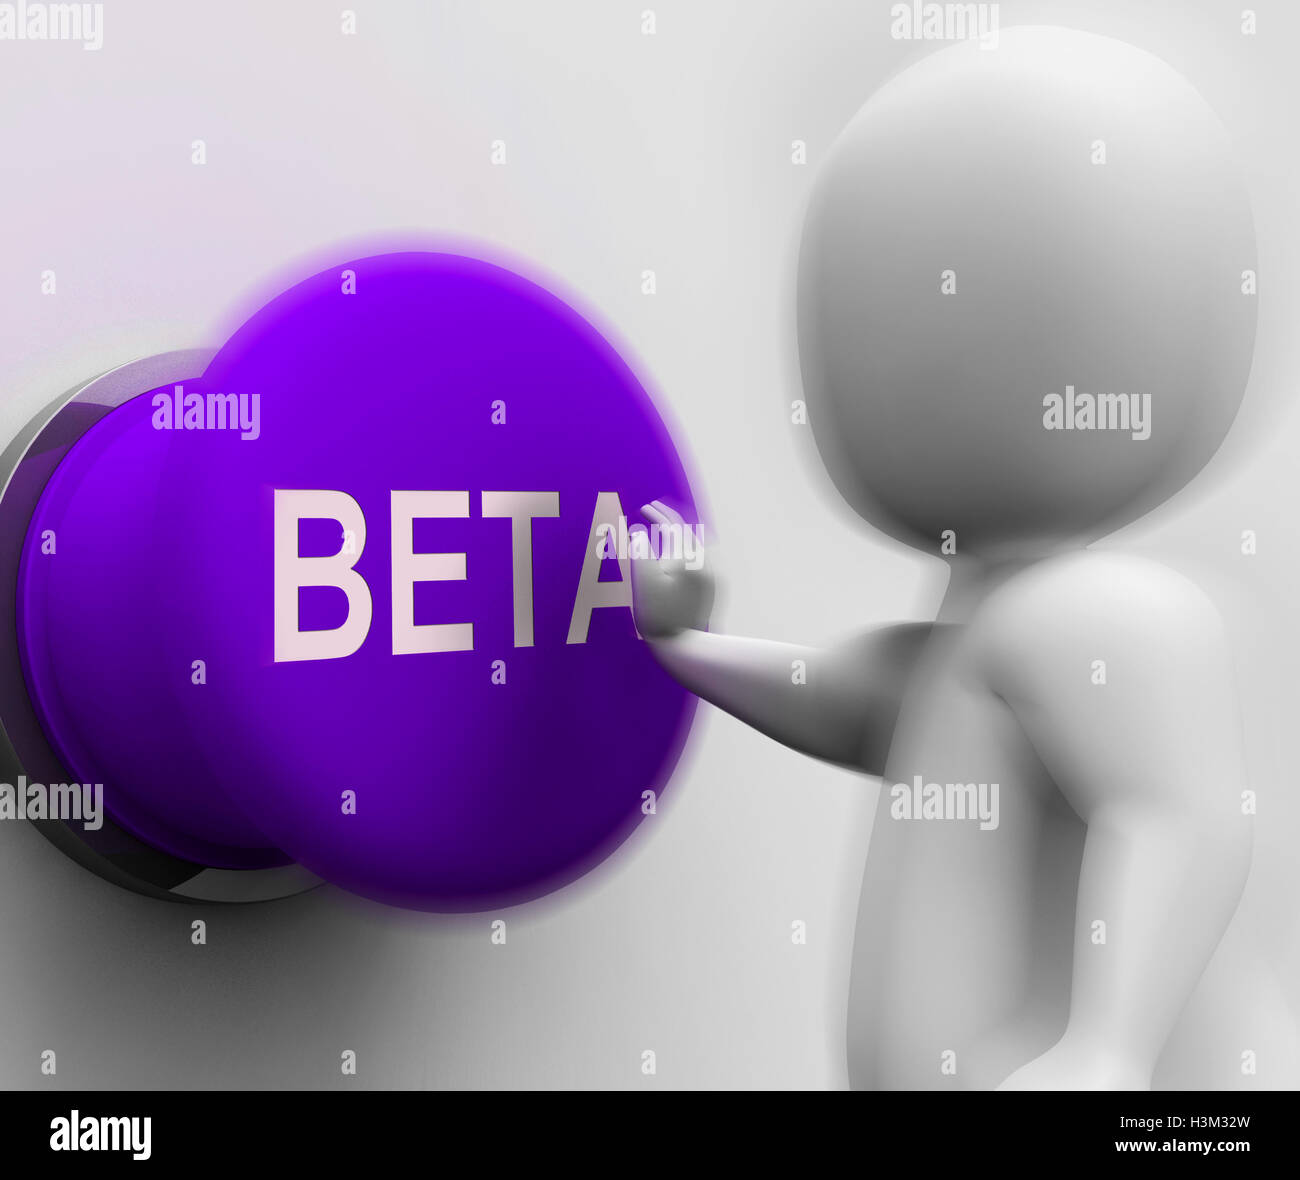 Beta Pressed Shows Software Trials And Versions Stock Photo